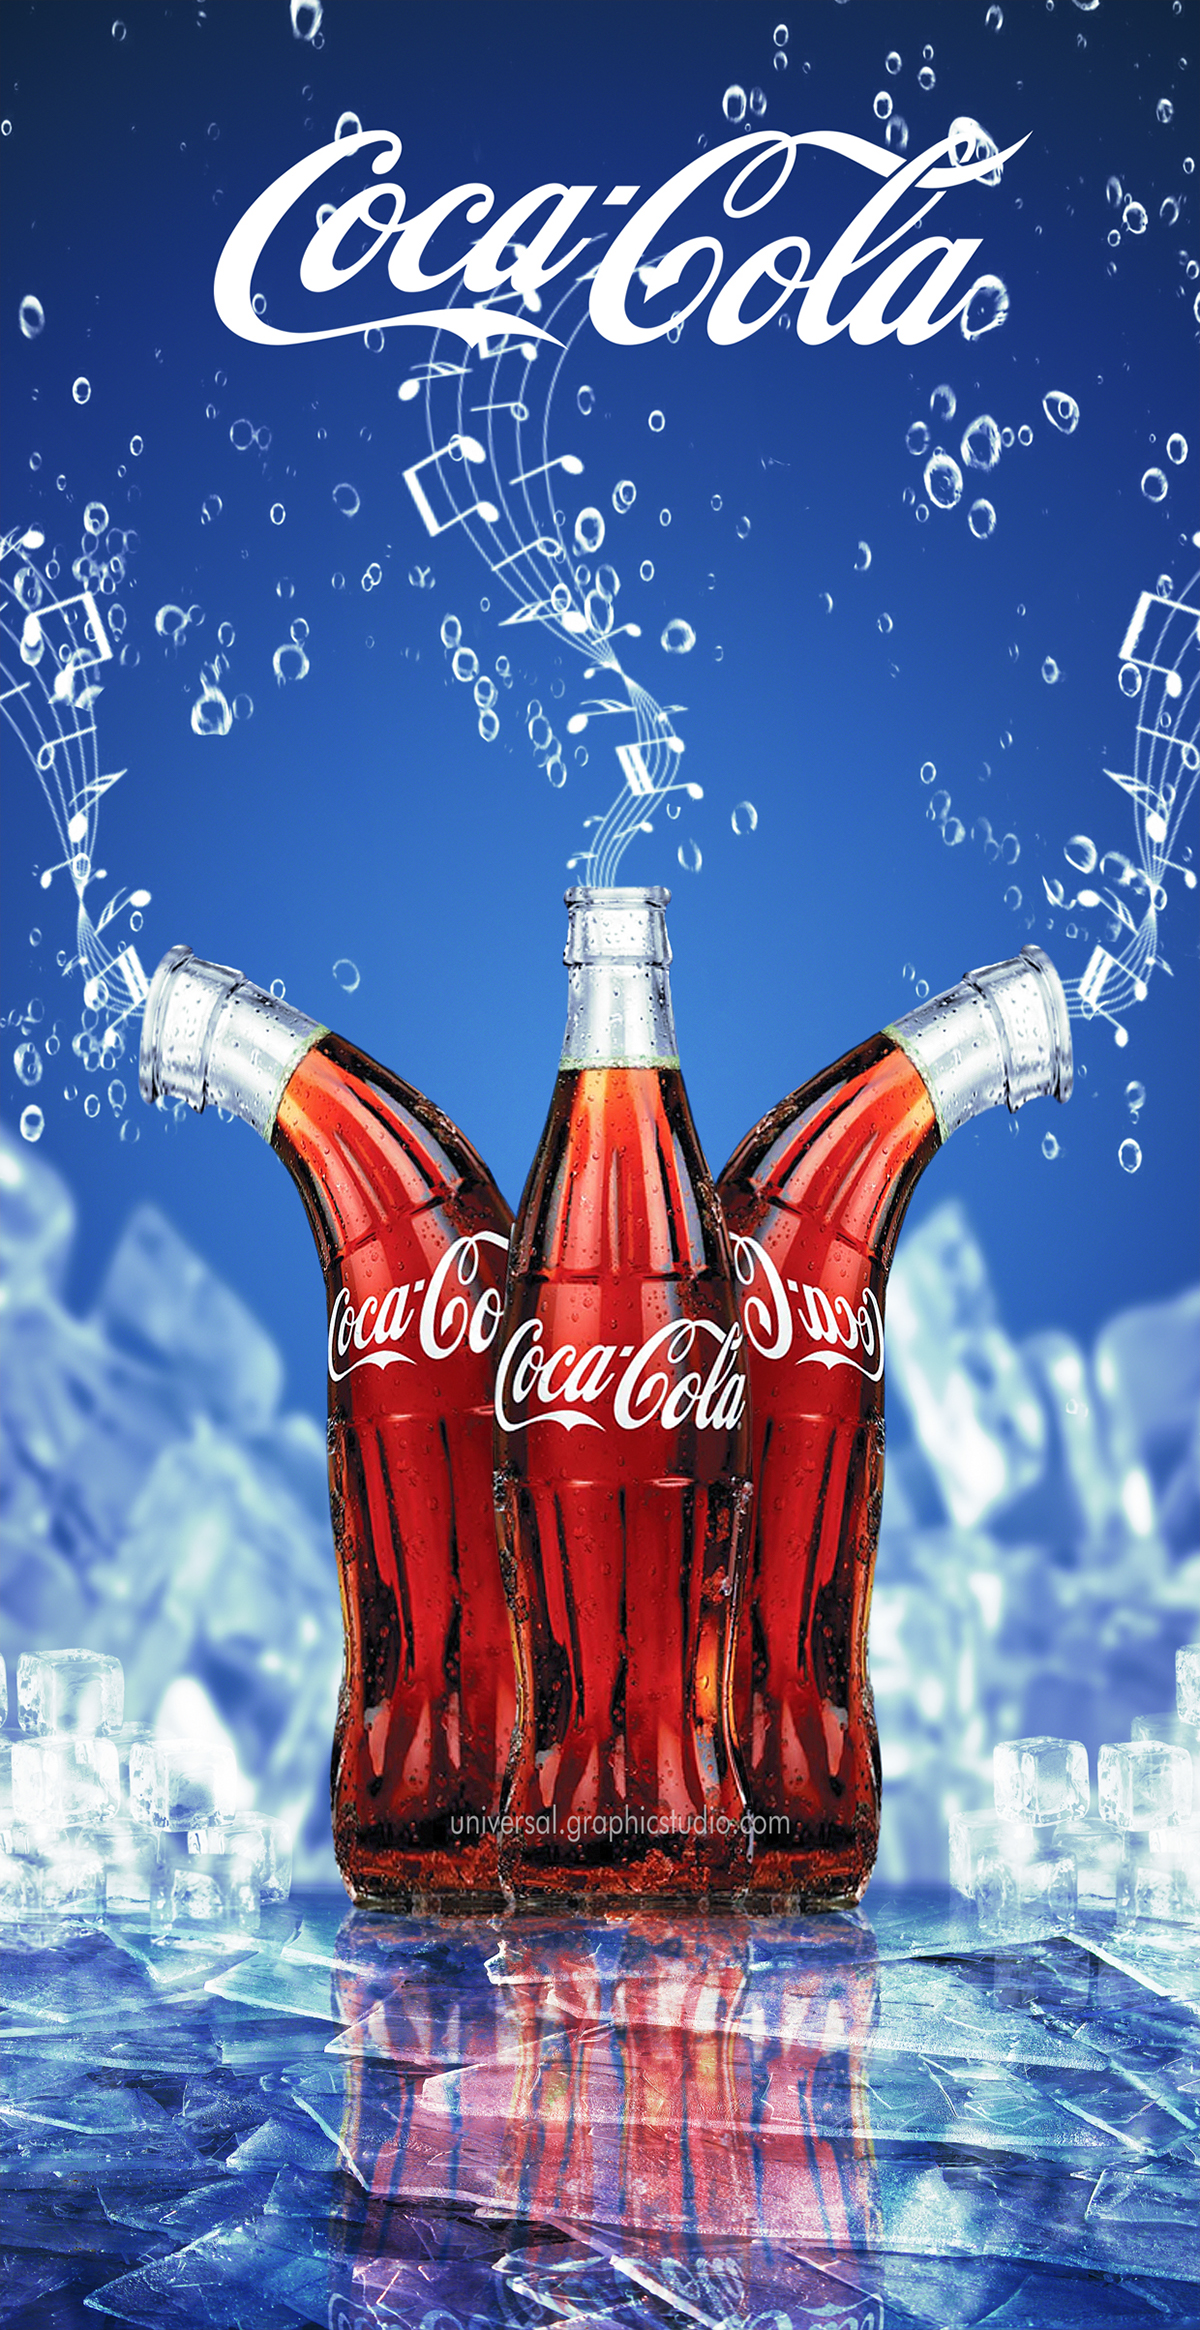 Cocal-Cola Drink Cold poster